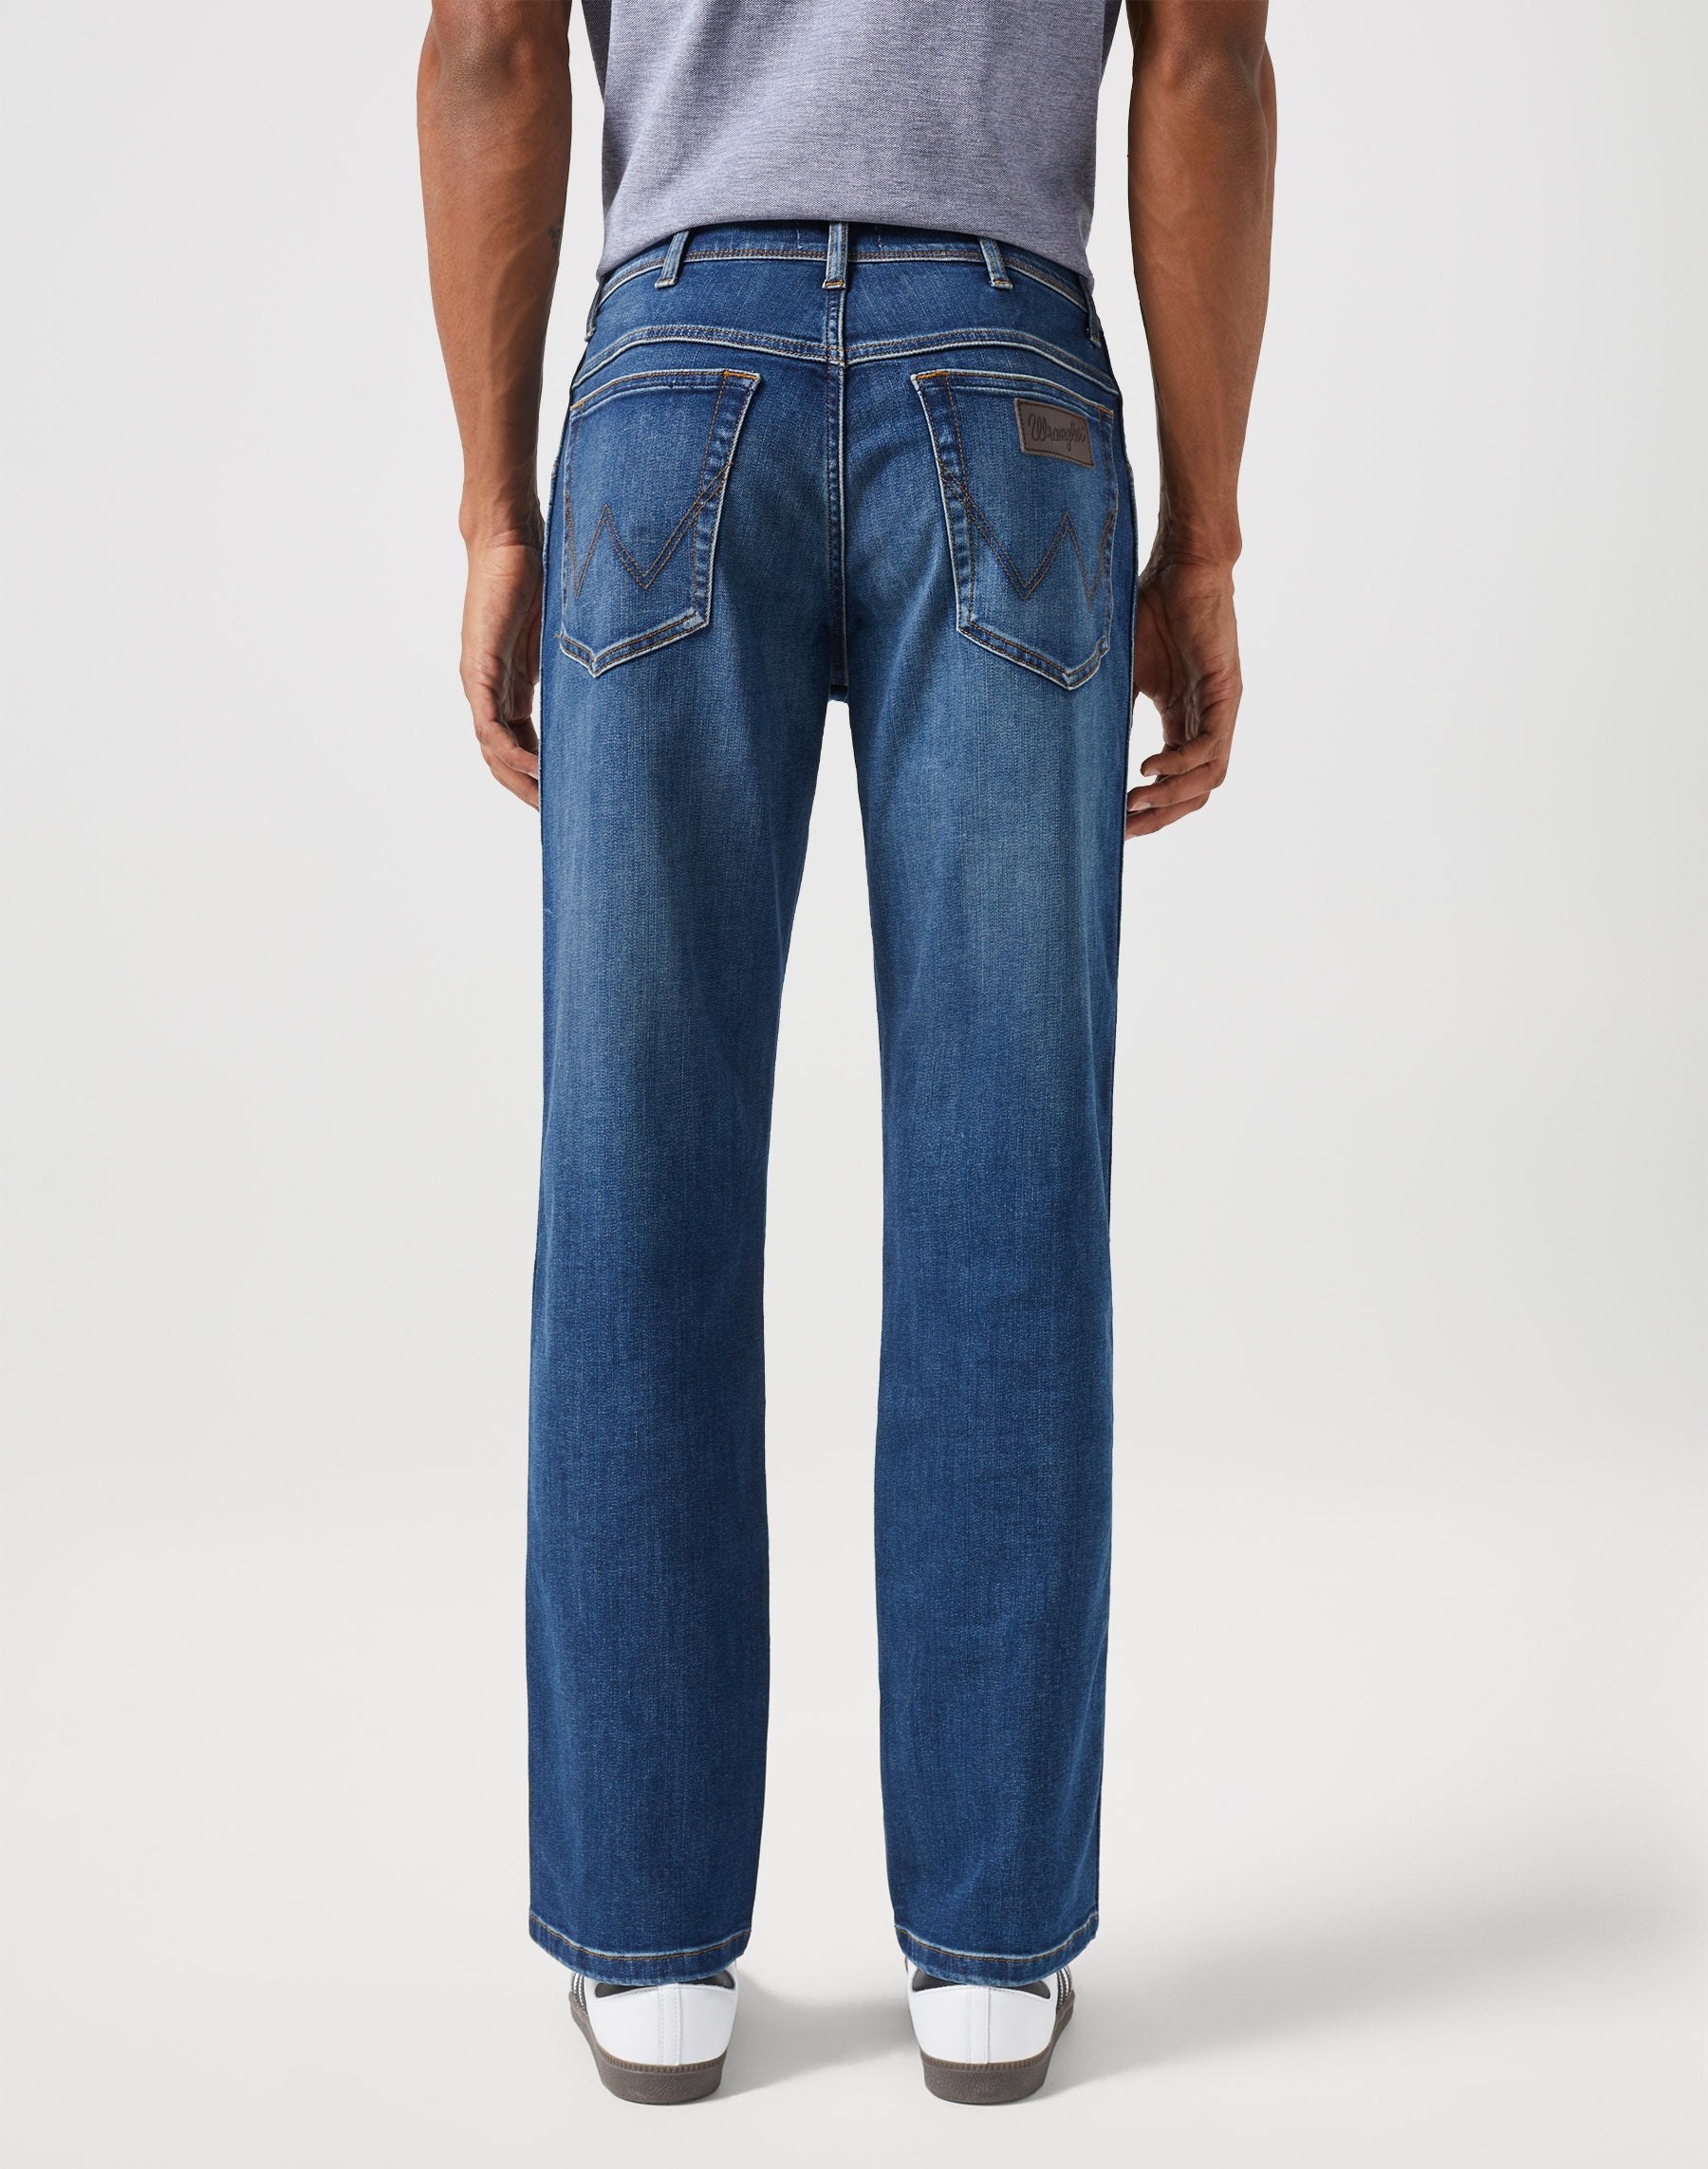 Texas Low Stretch in Hare Jeans Wrangler   